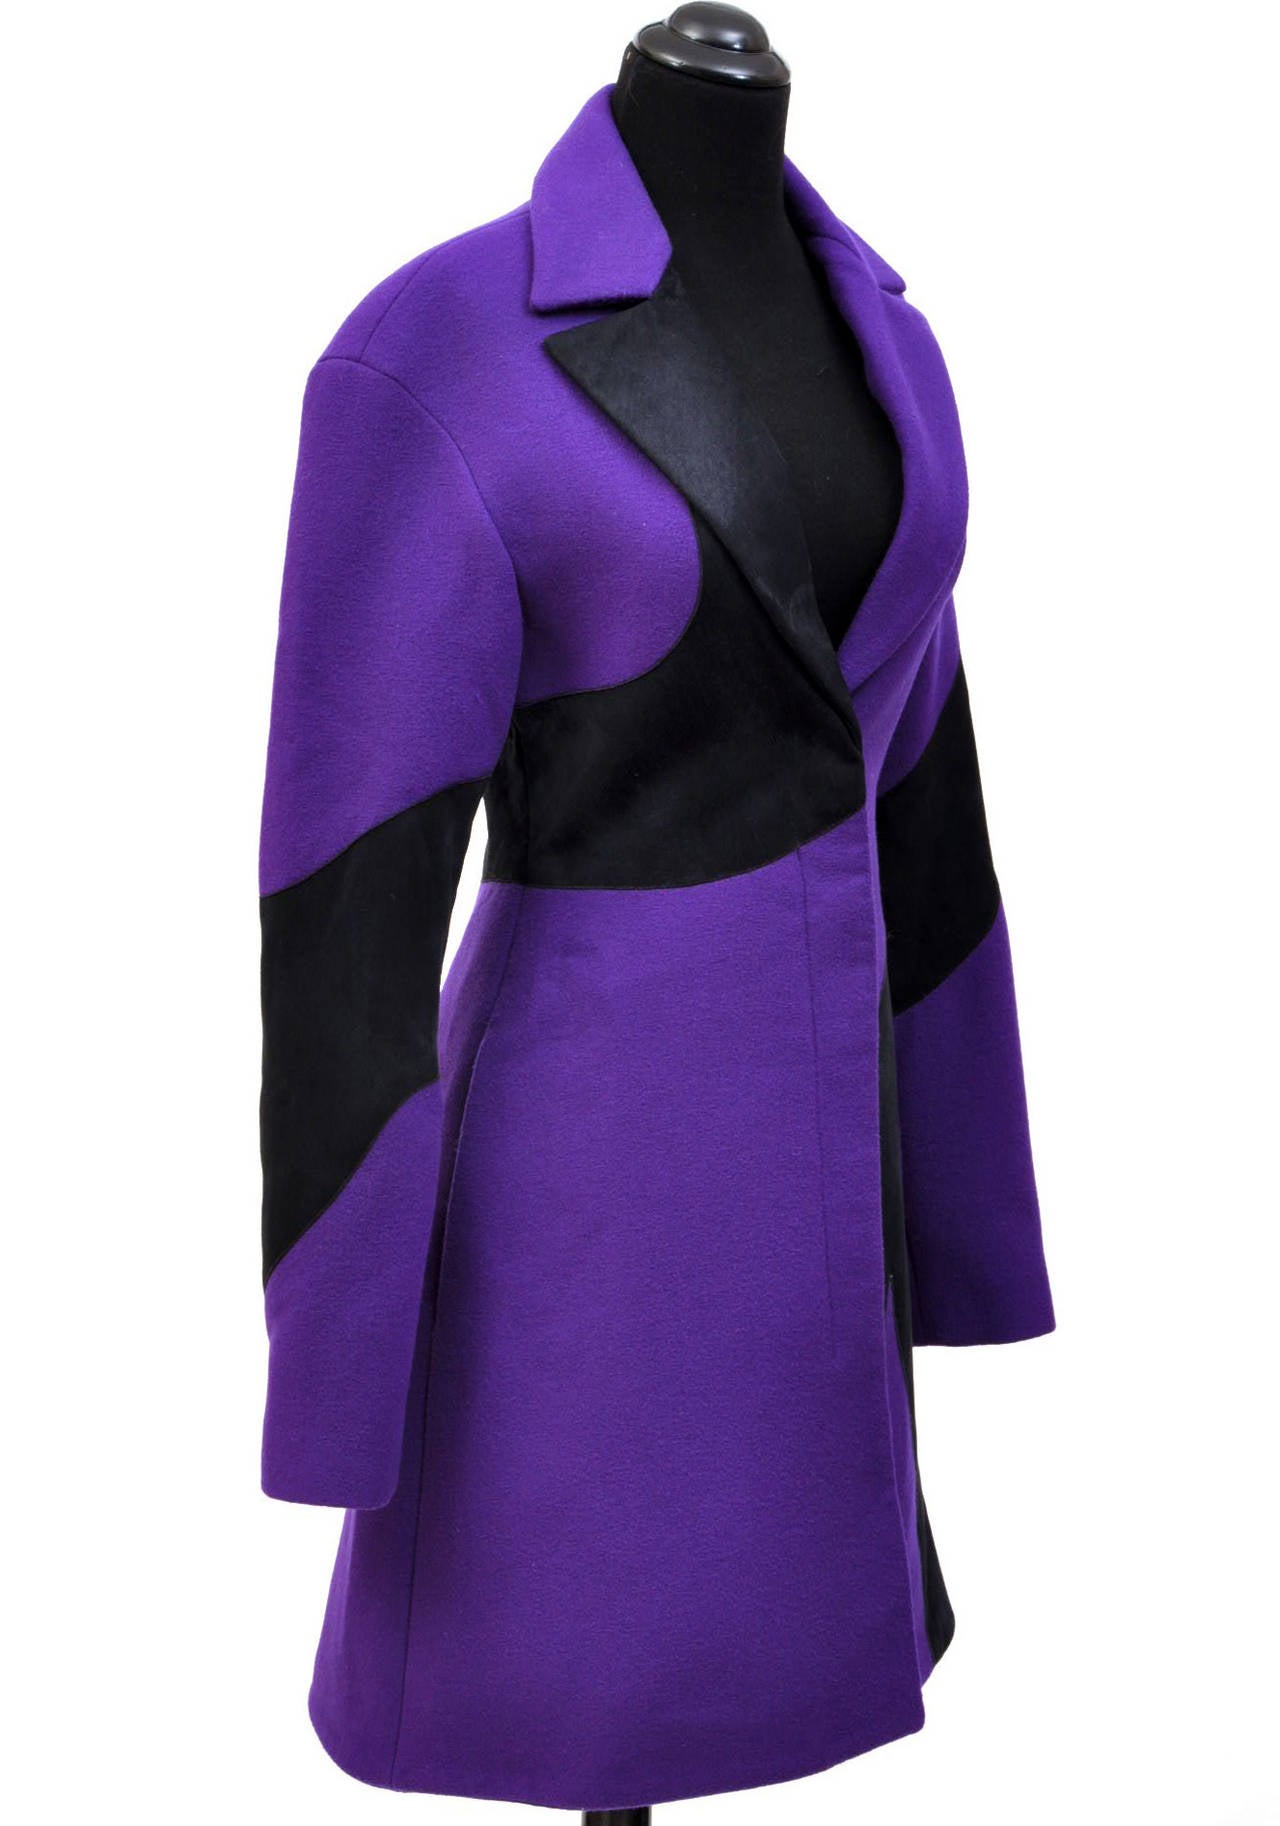 Women's F/W 2011 look #20 NEW VERSACE VIOLET WOOL COAT with SUEDE 38 - 4 For Sale